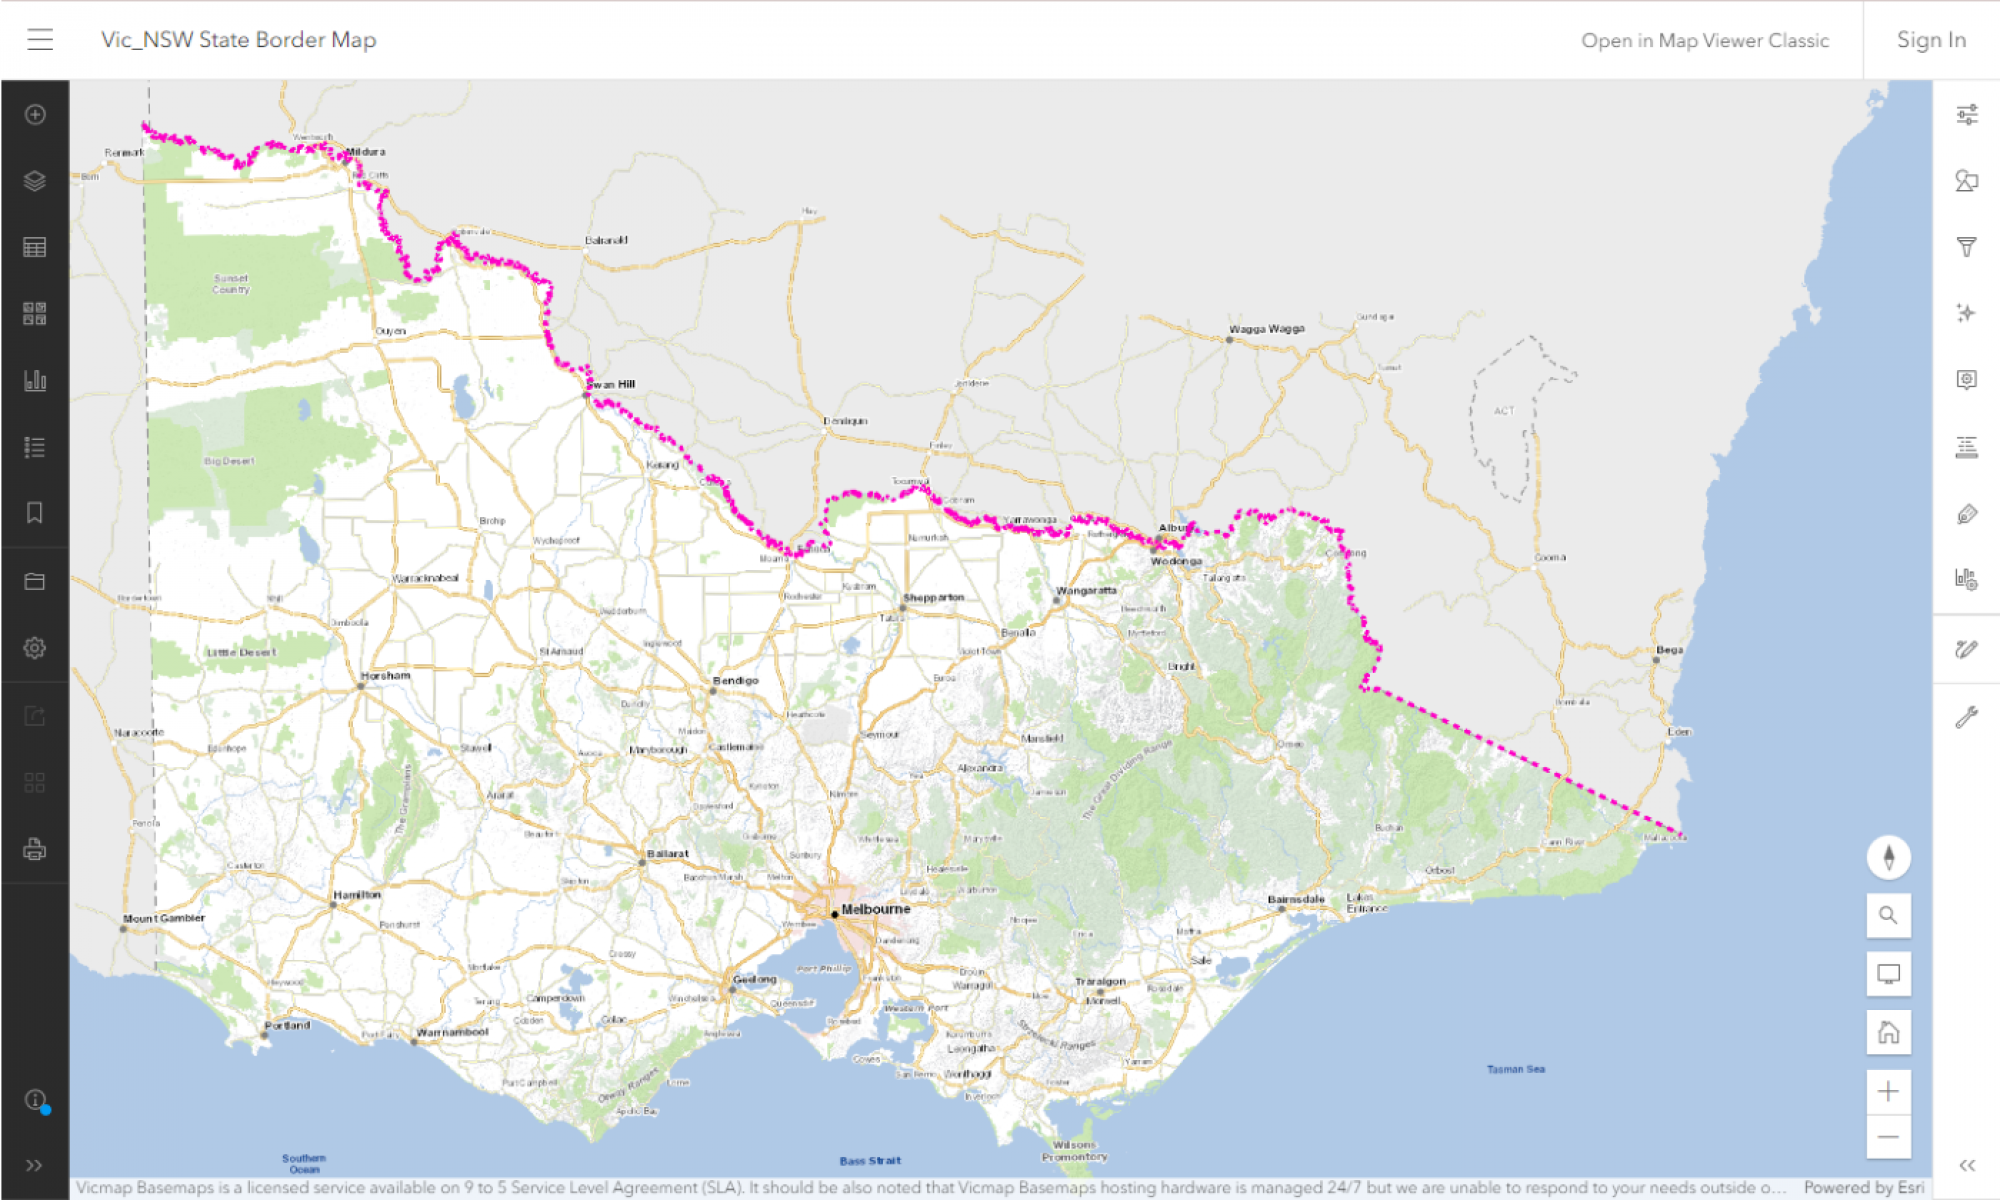 A map of the state of Victoria with the border line between Victoria and New South Wales represented by a series of pink dashed lines.